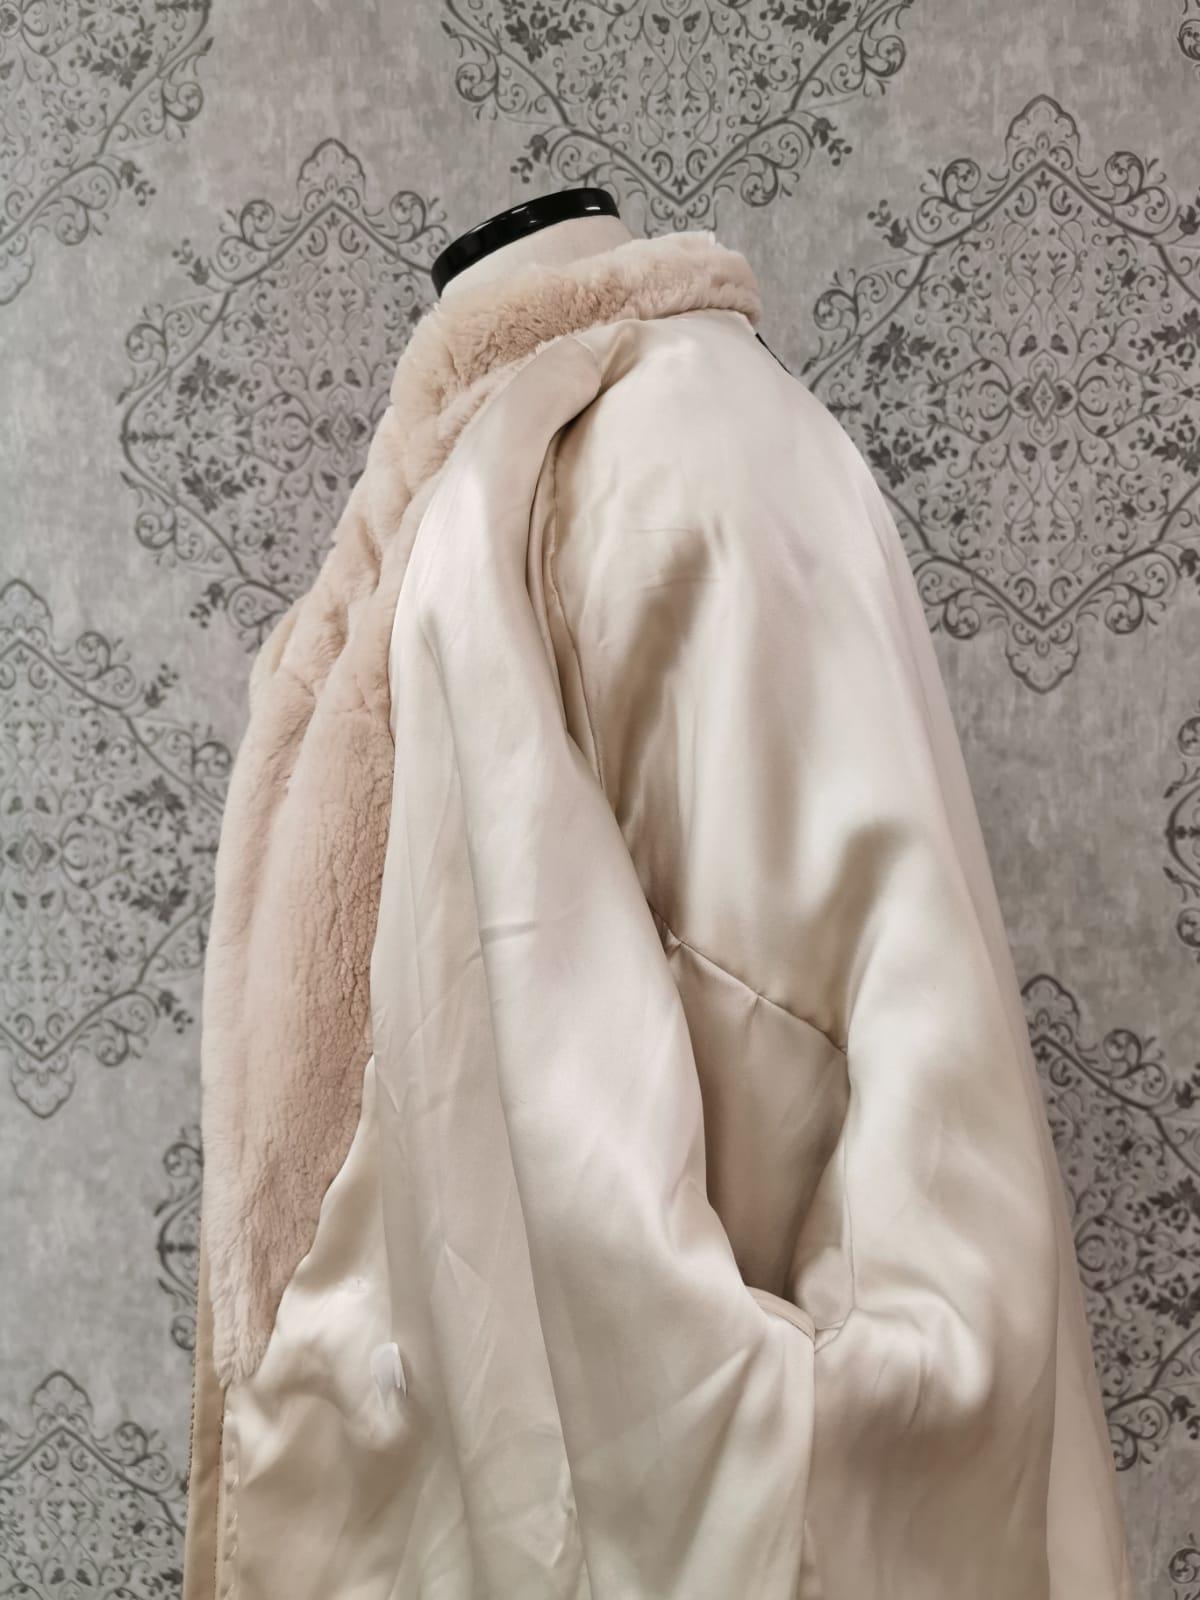 sheared beaver fur coat size 16 In Excellent Condition For Sale In Montreal, Quebec